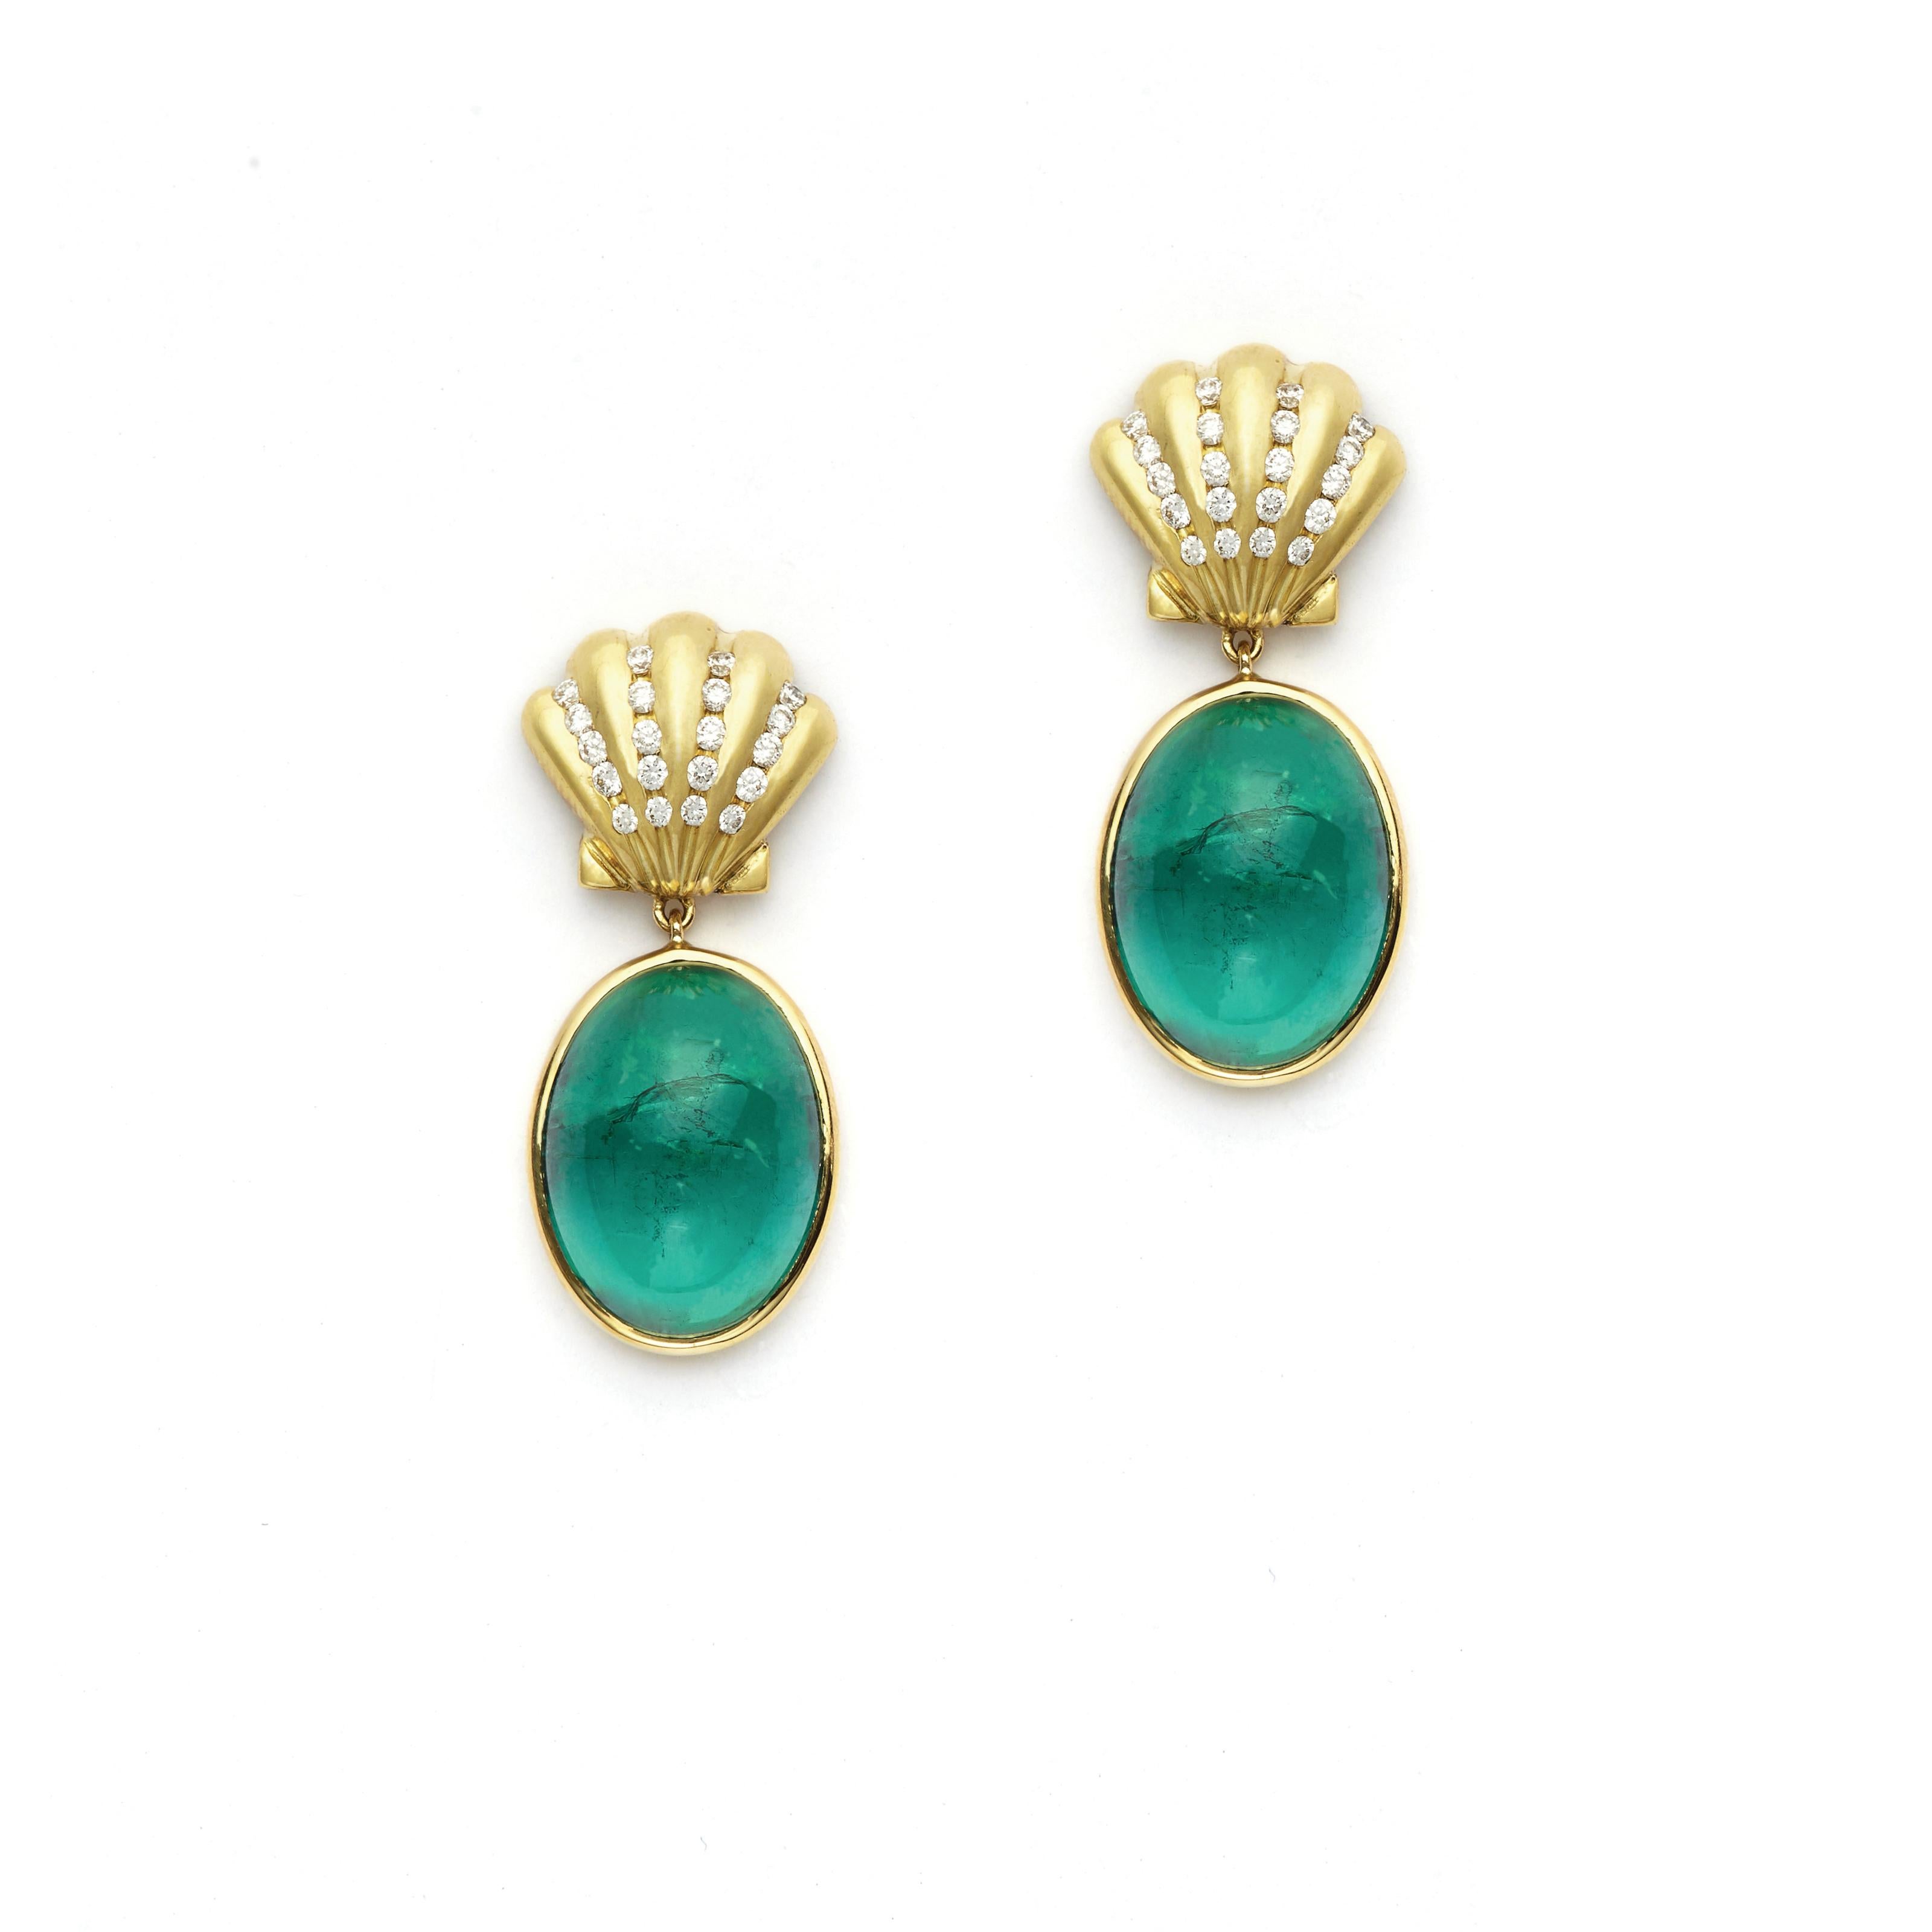 The vibrant Green Tourmalines (30.50ct) are crowned by Susan Lister Locke’s 18kt Yellow Gold and Diamond Shells (0.33ct)
